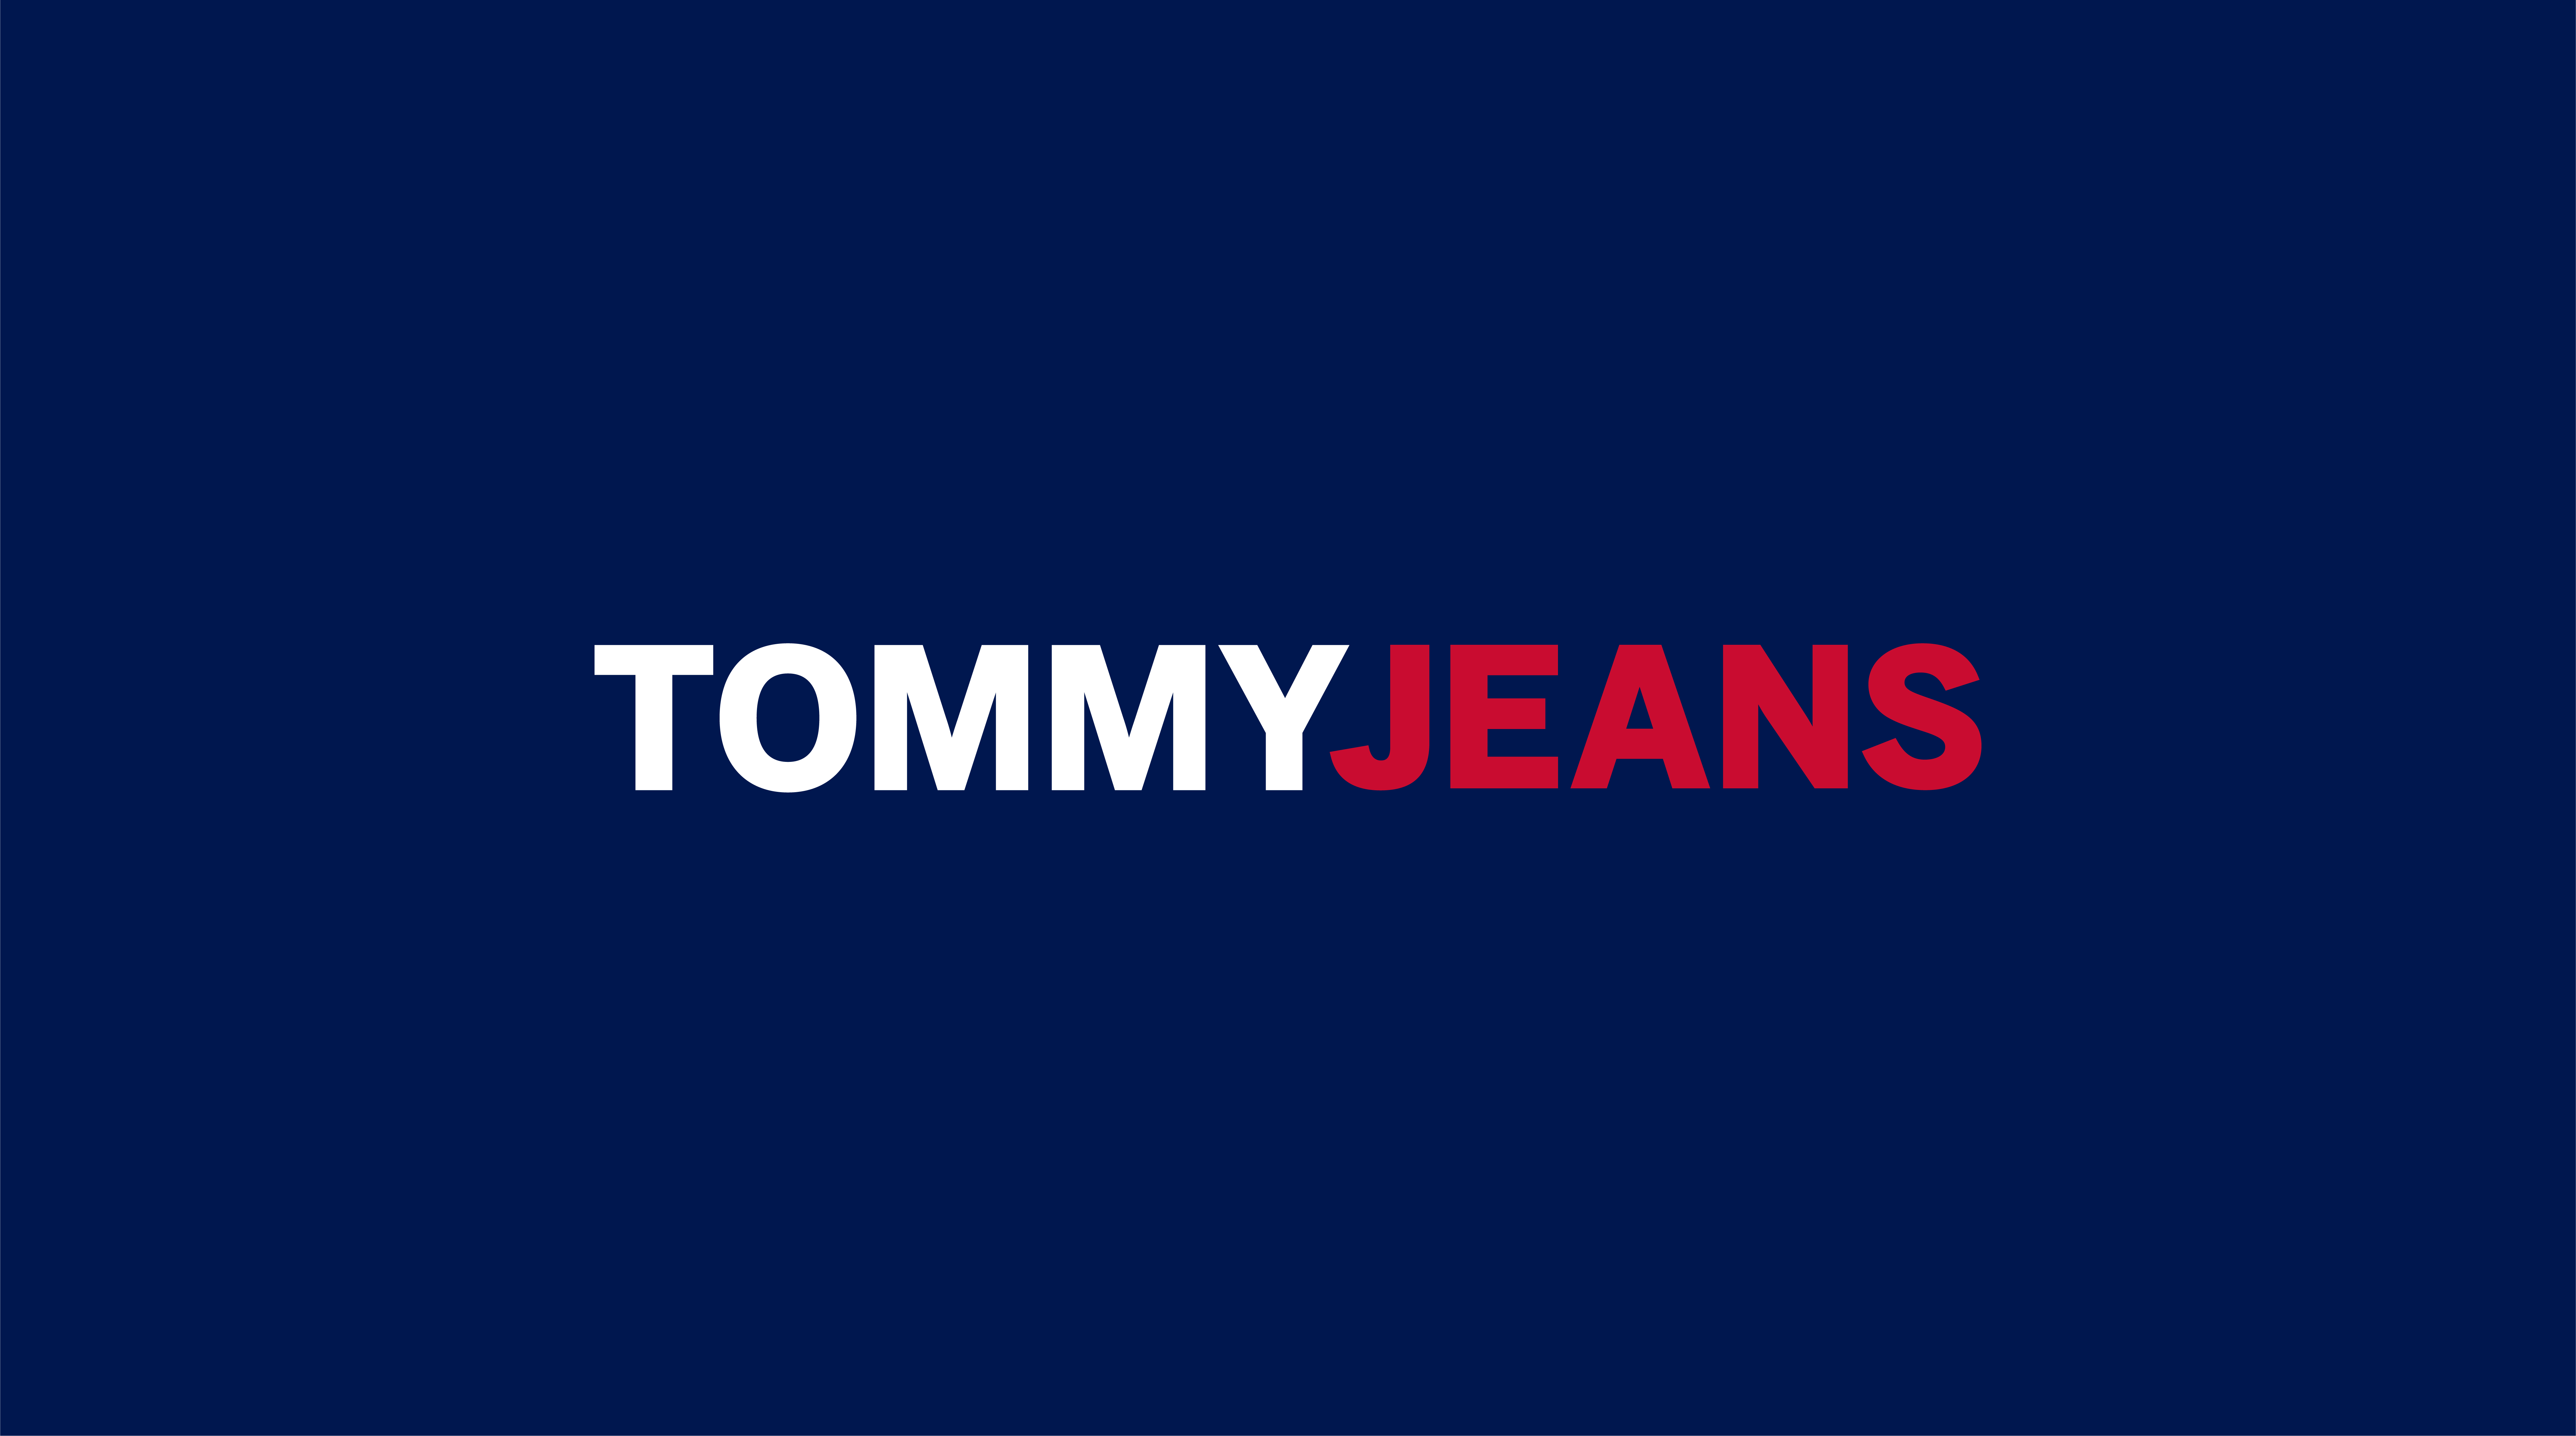 tommy jeans brand